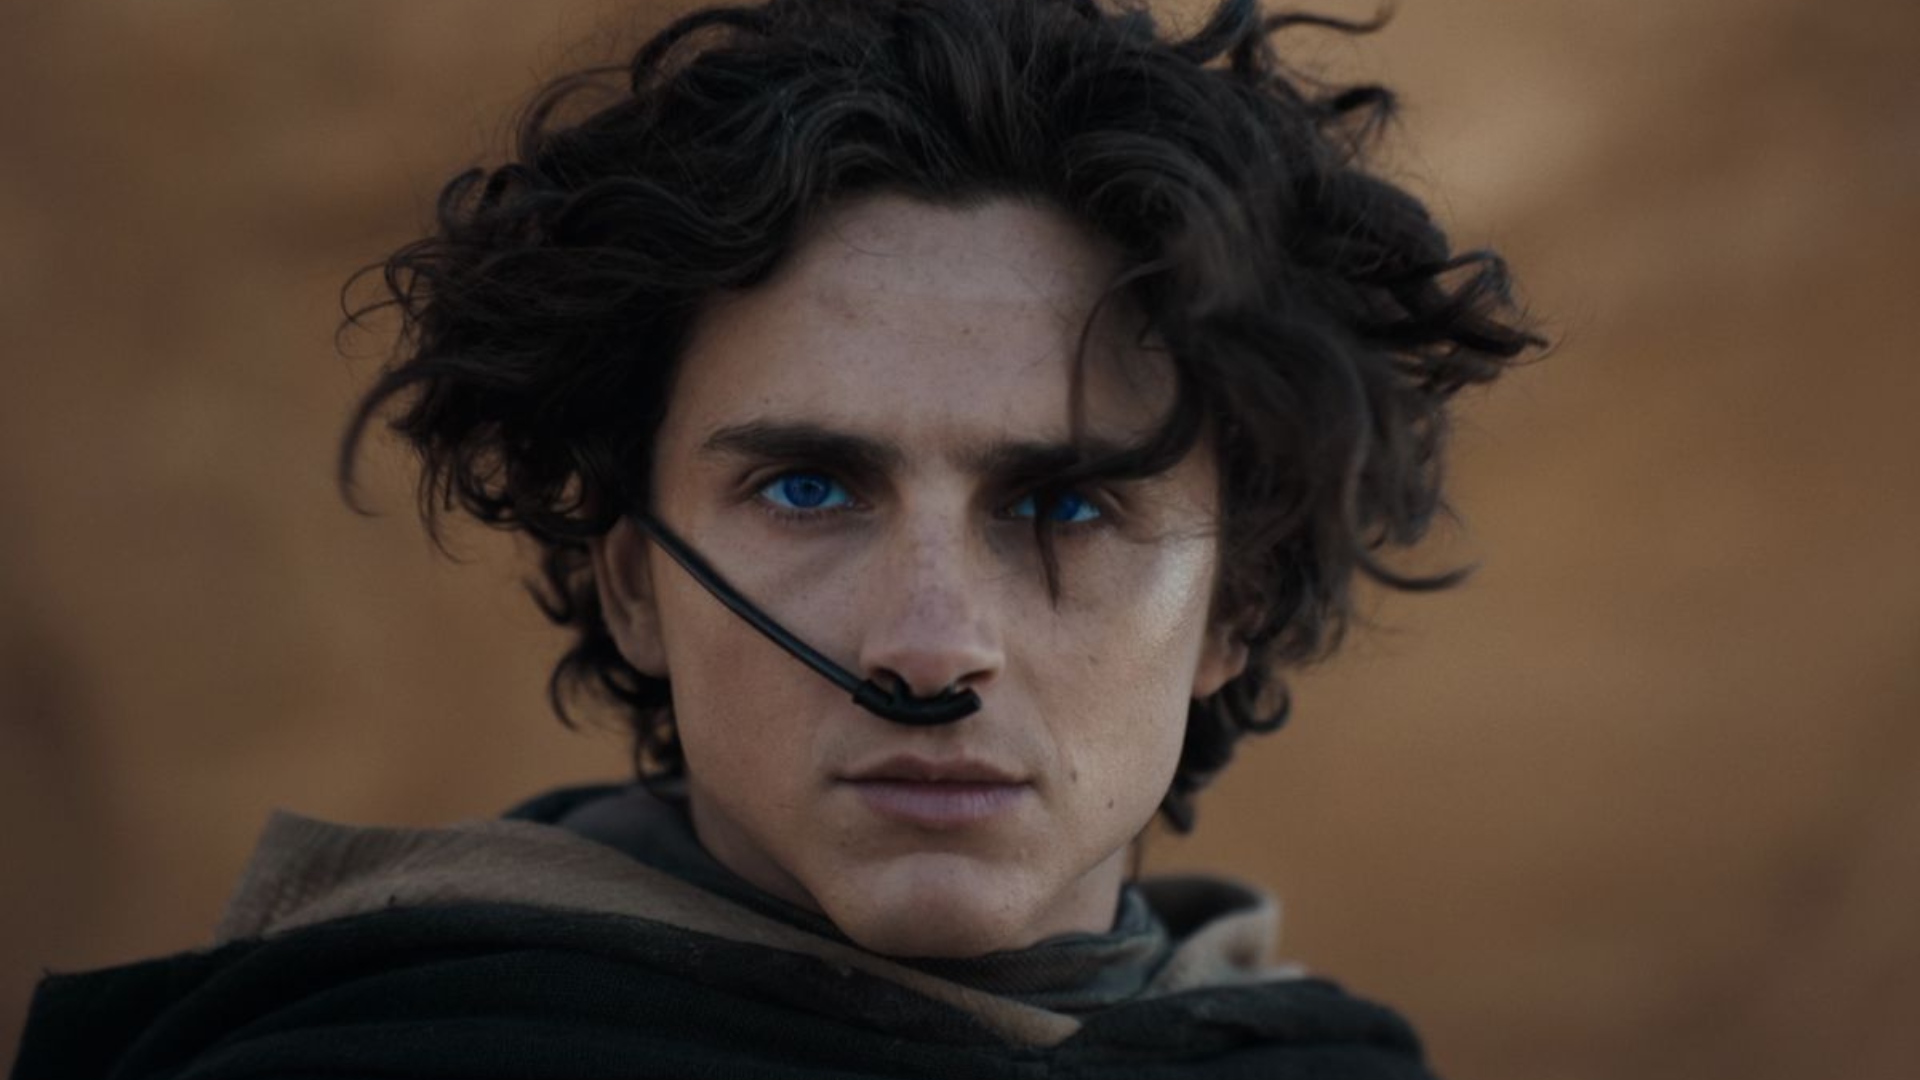 Dune 2 box office collection day 3: How much did Timothée Chalamet film earn on first Sunday?